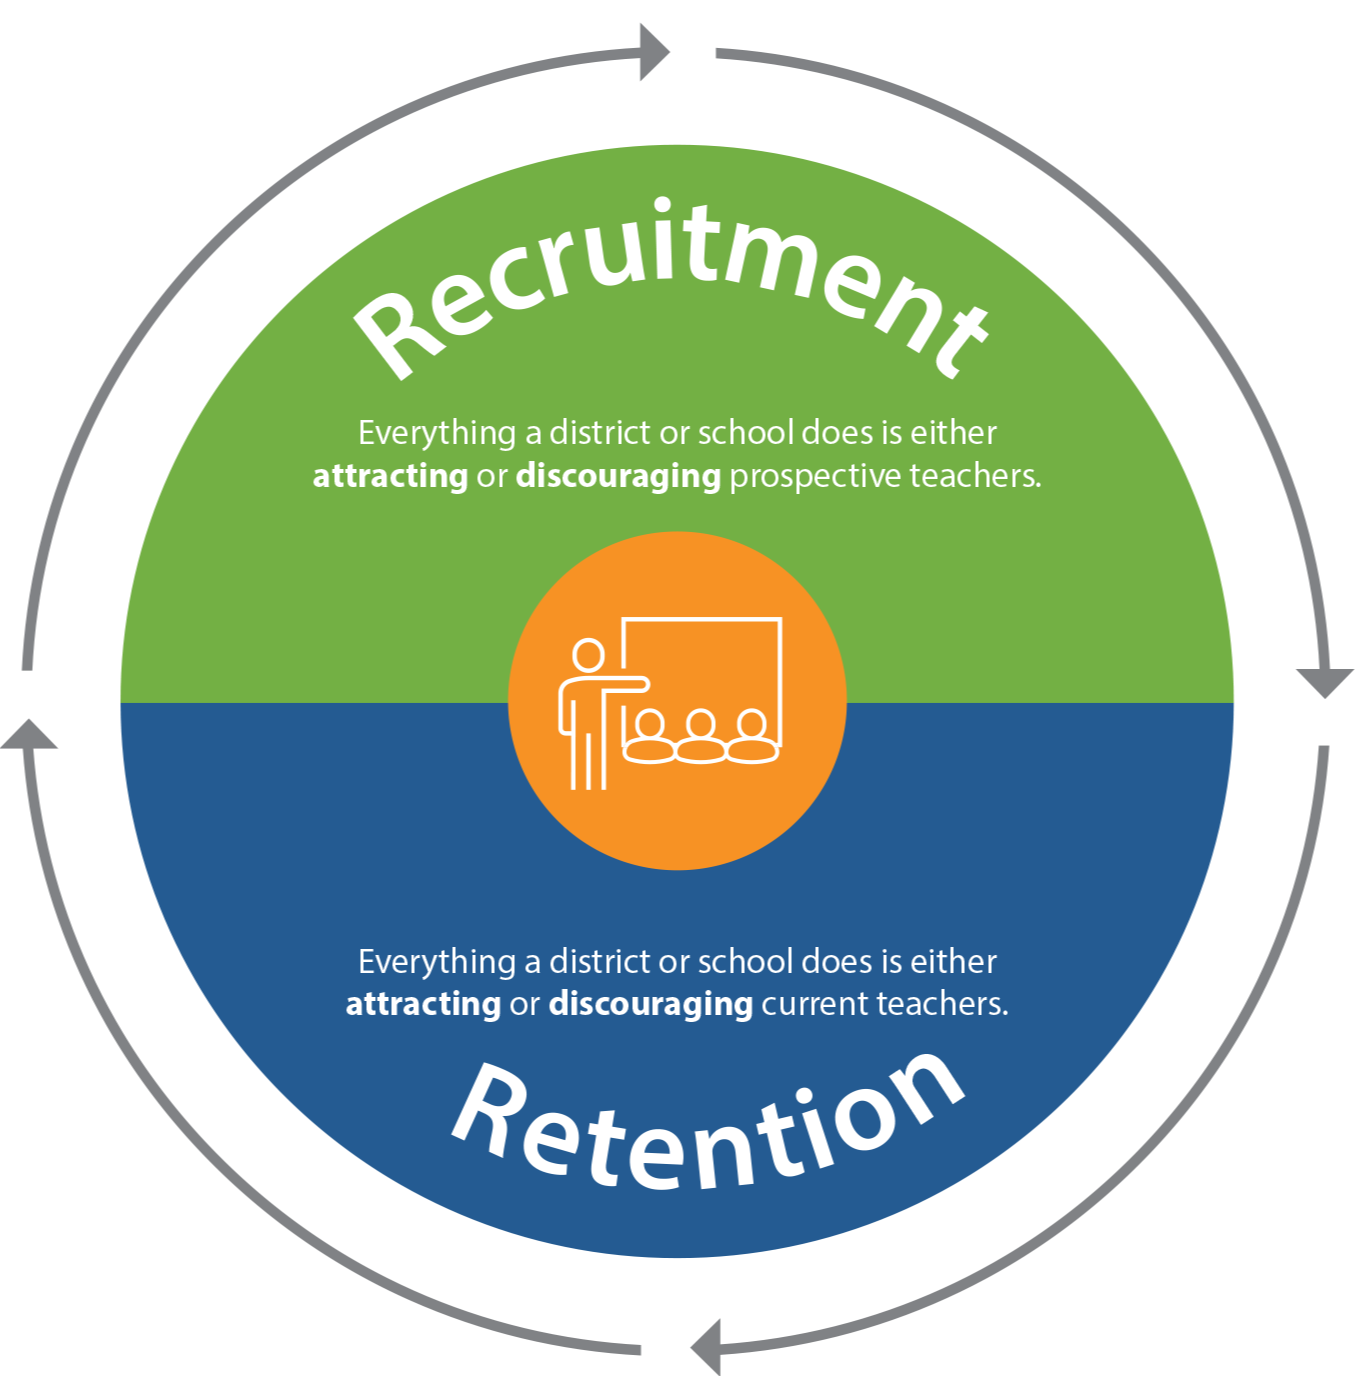 Recruitment-Retention_Attracting-Discouraging_Insight_Large-1-3